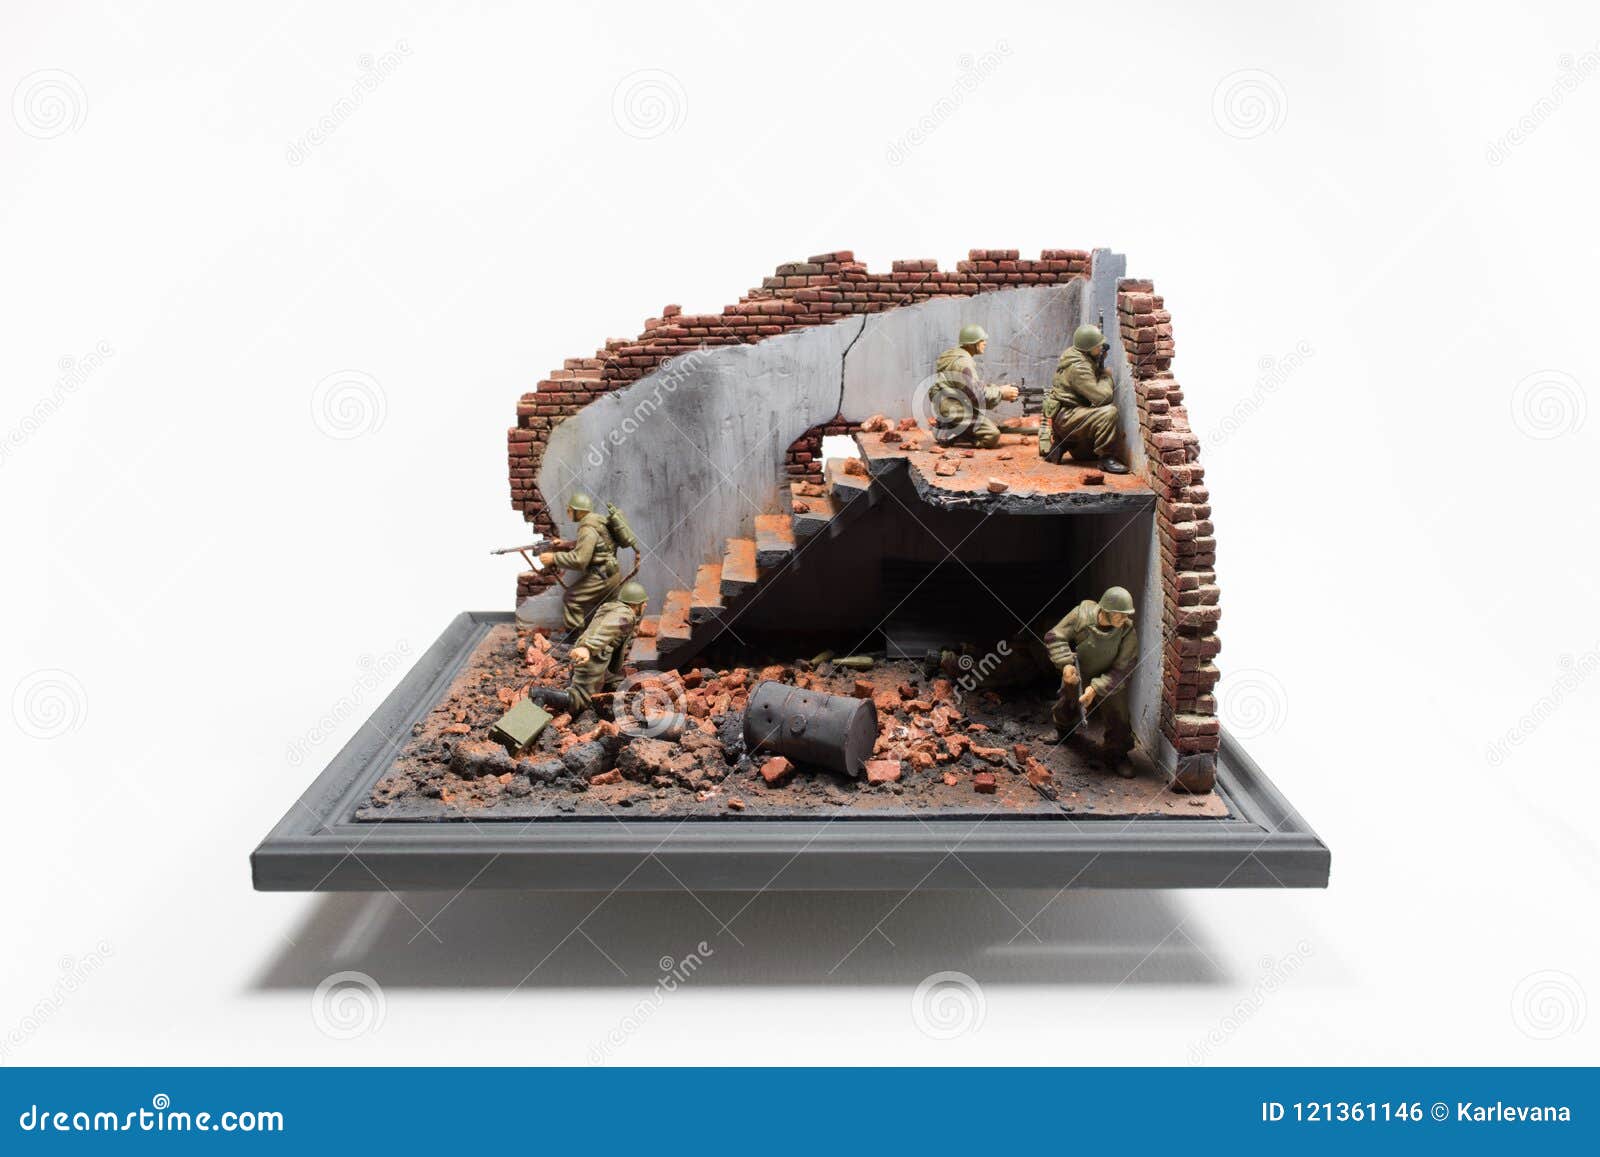 https://thumbs.dreamstime.com/z/diorama-storm-indoors-ruined-building-six-soviet-soldiers-weapon-white-background-copy-space-diorama-121361146.jpg